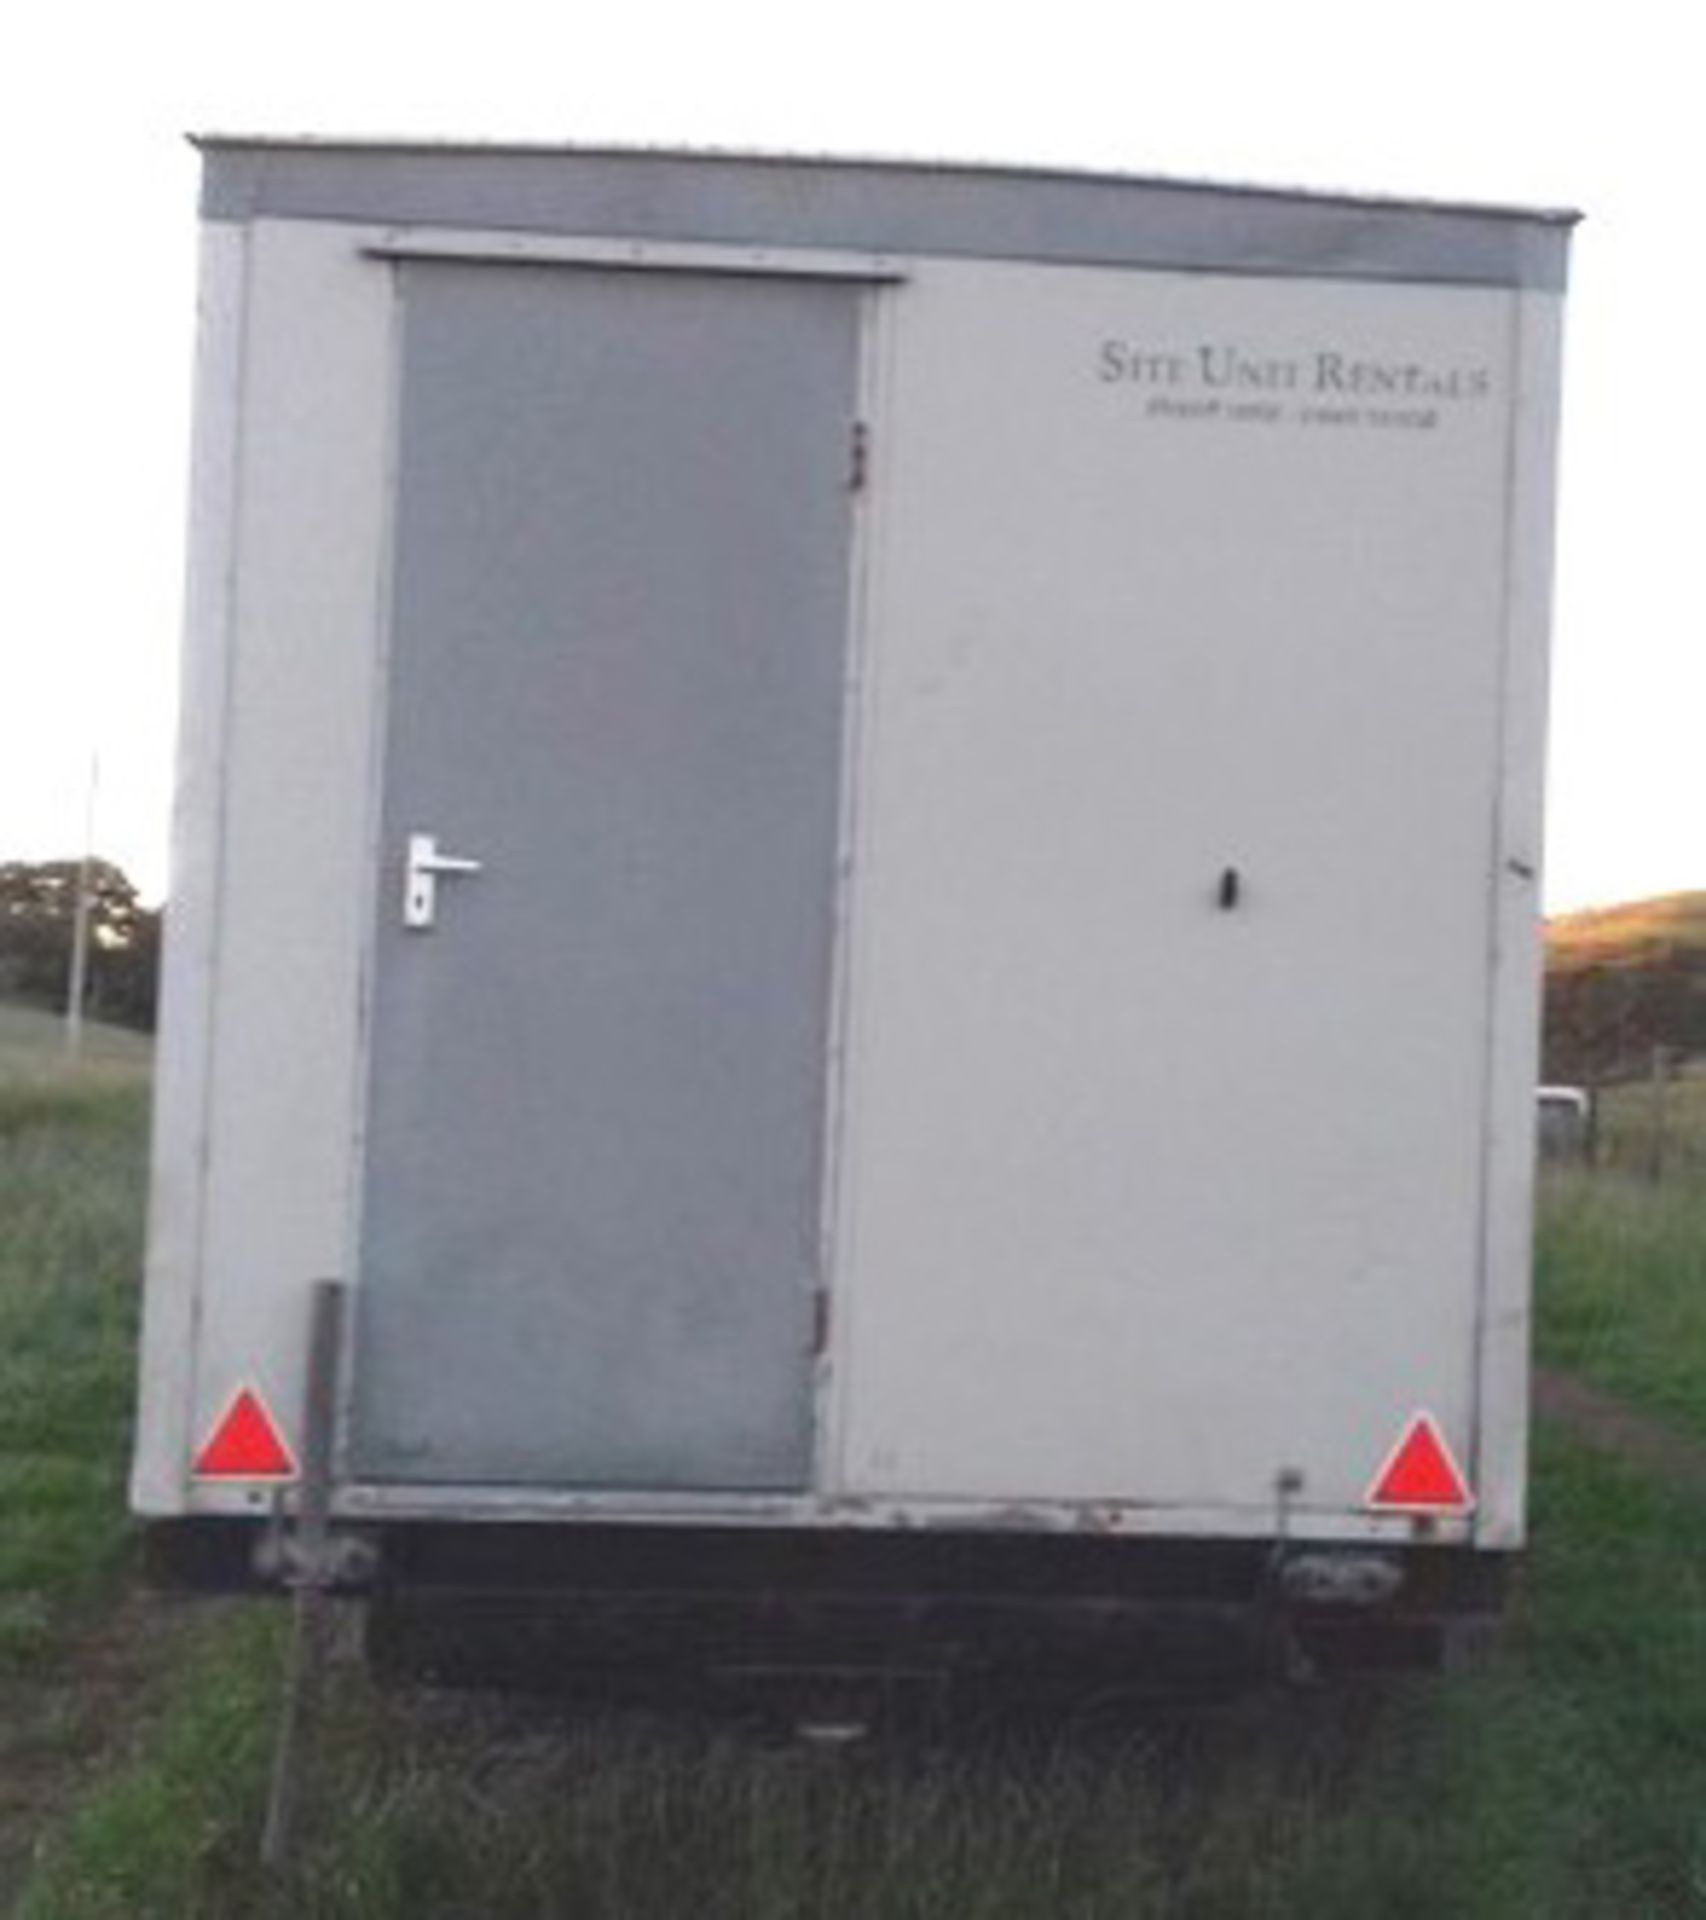 Event hire mobile toilet block c/w 1996 roll-a-long 20' x 7' trailer on springs. Fully equipped for - Bild 4 aus 9